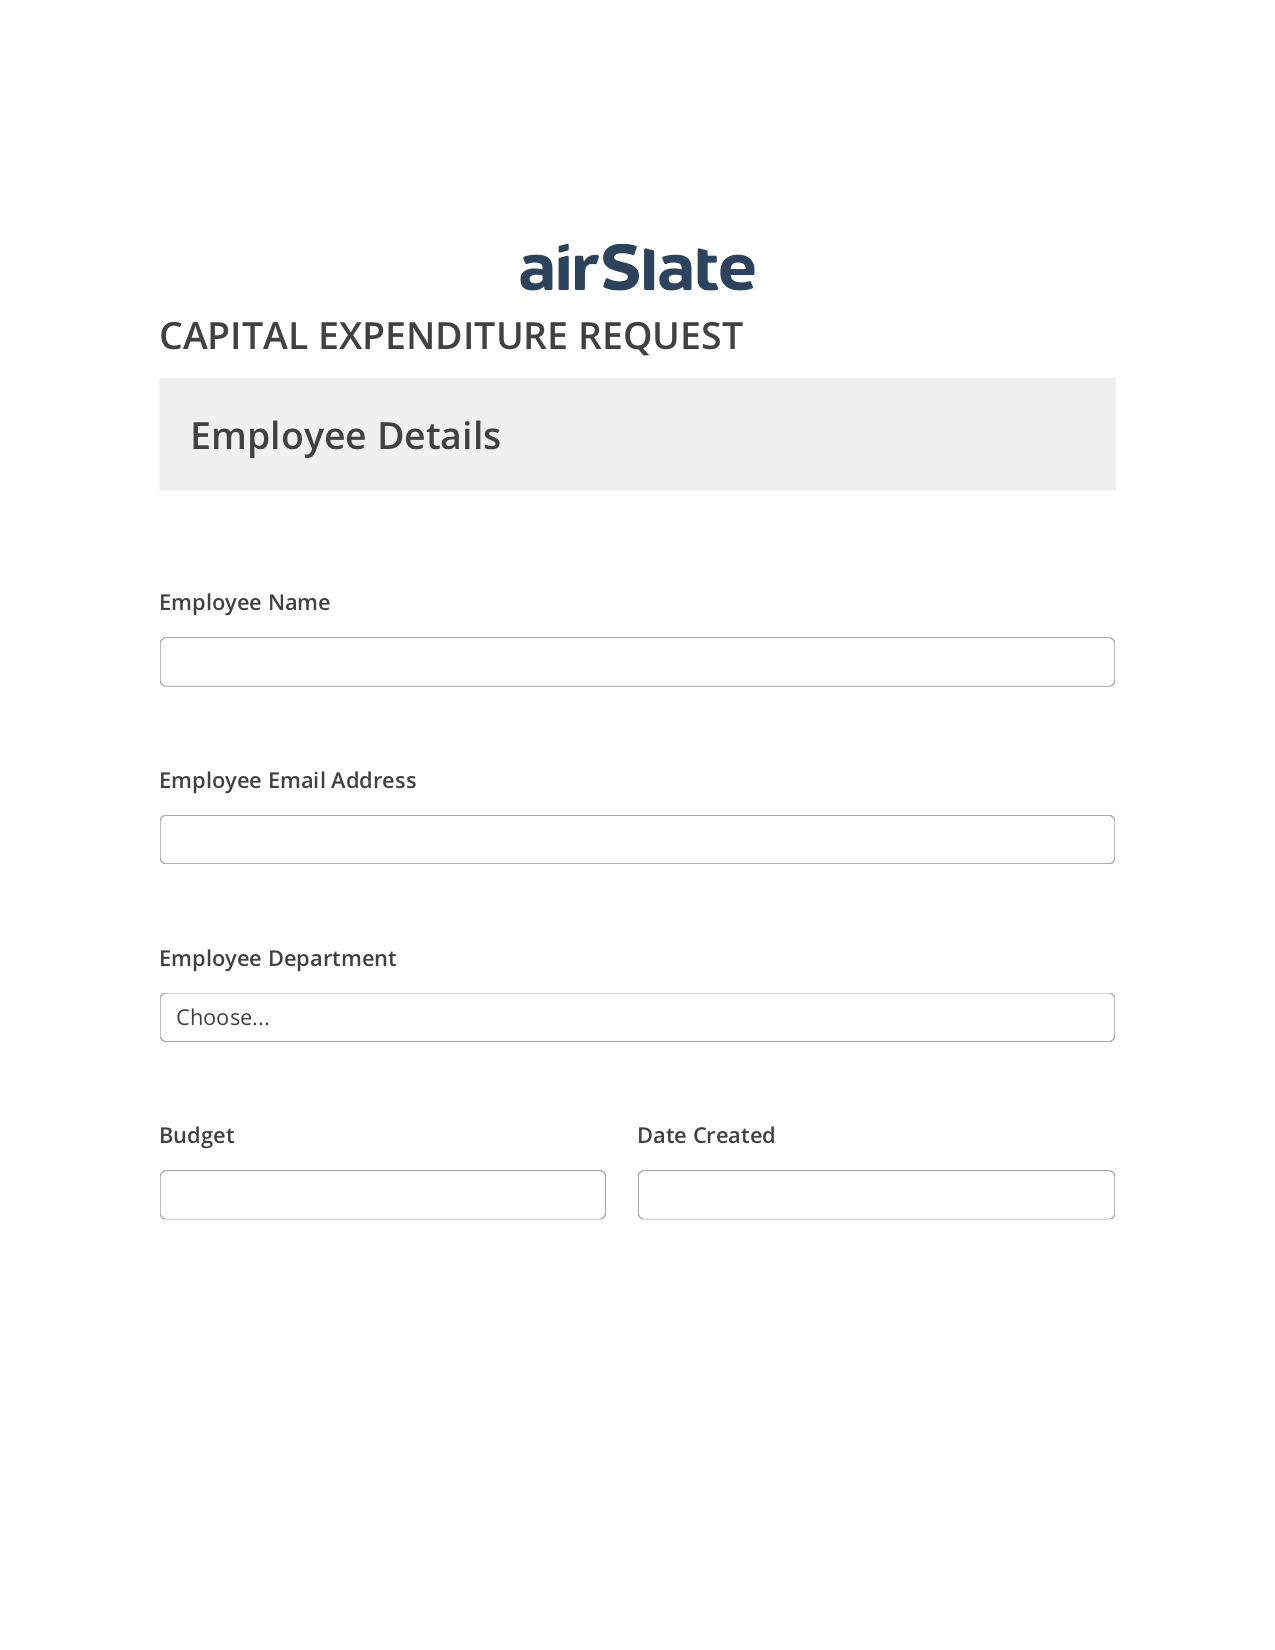 Capital Expenditure Request Approval Workflow Pre-fill from Google Sheet Dropdown Options Bot, Set signature type addon, Slack Notification Postfinish Bot